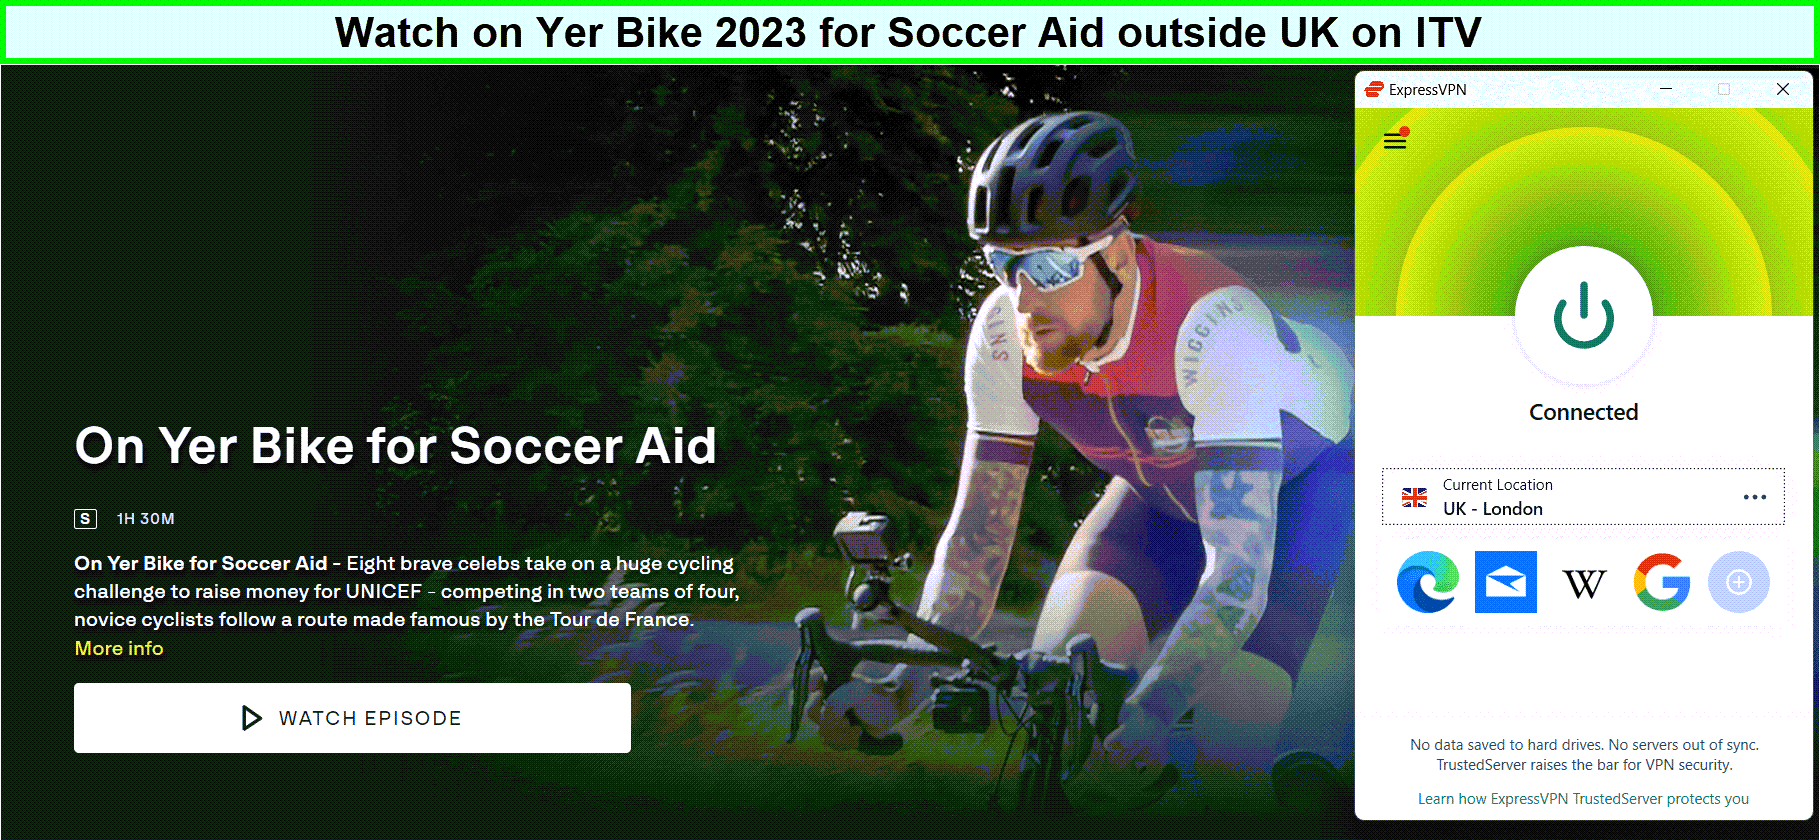 Watch-On-Yer-Bike-2023-for-Soccer-Aid-in-Italy-on-ITV-with-ExpressVPN